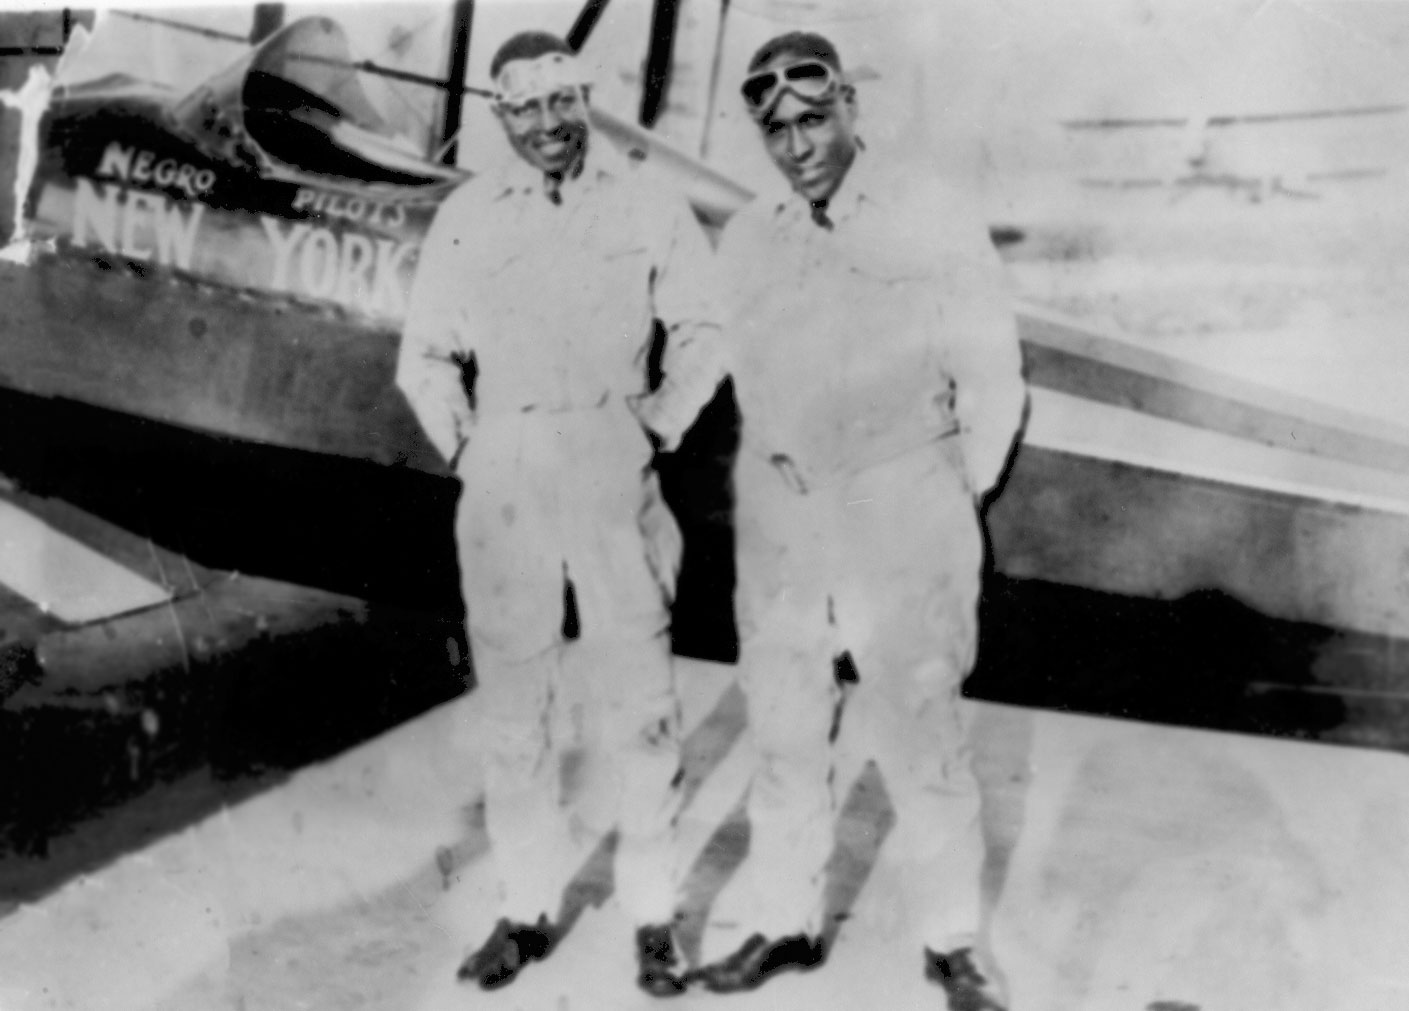 Pilots Thomas Allen and James Herman Banning stand in front of an airplane wearing pilots googles and flight suits 